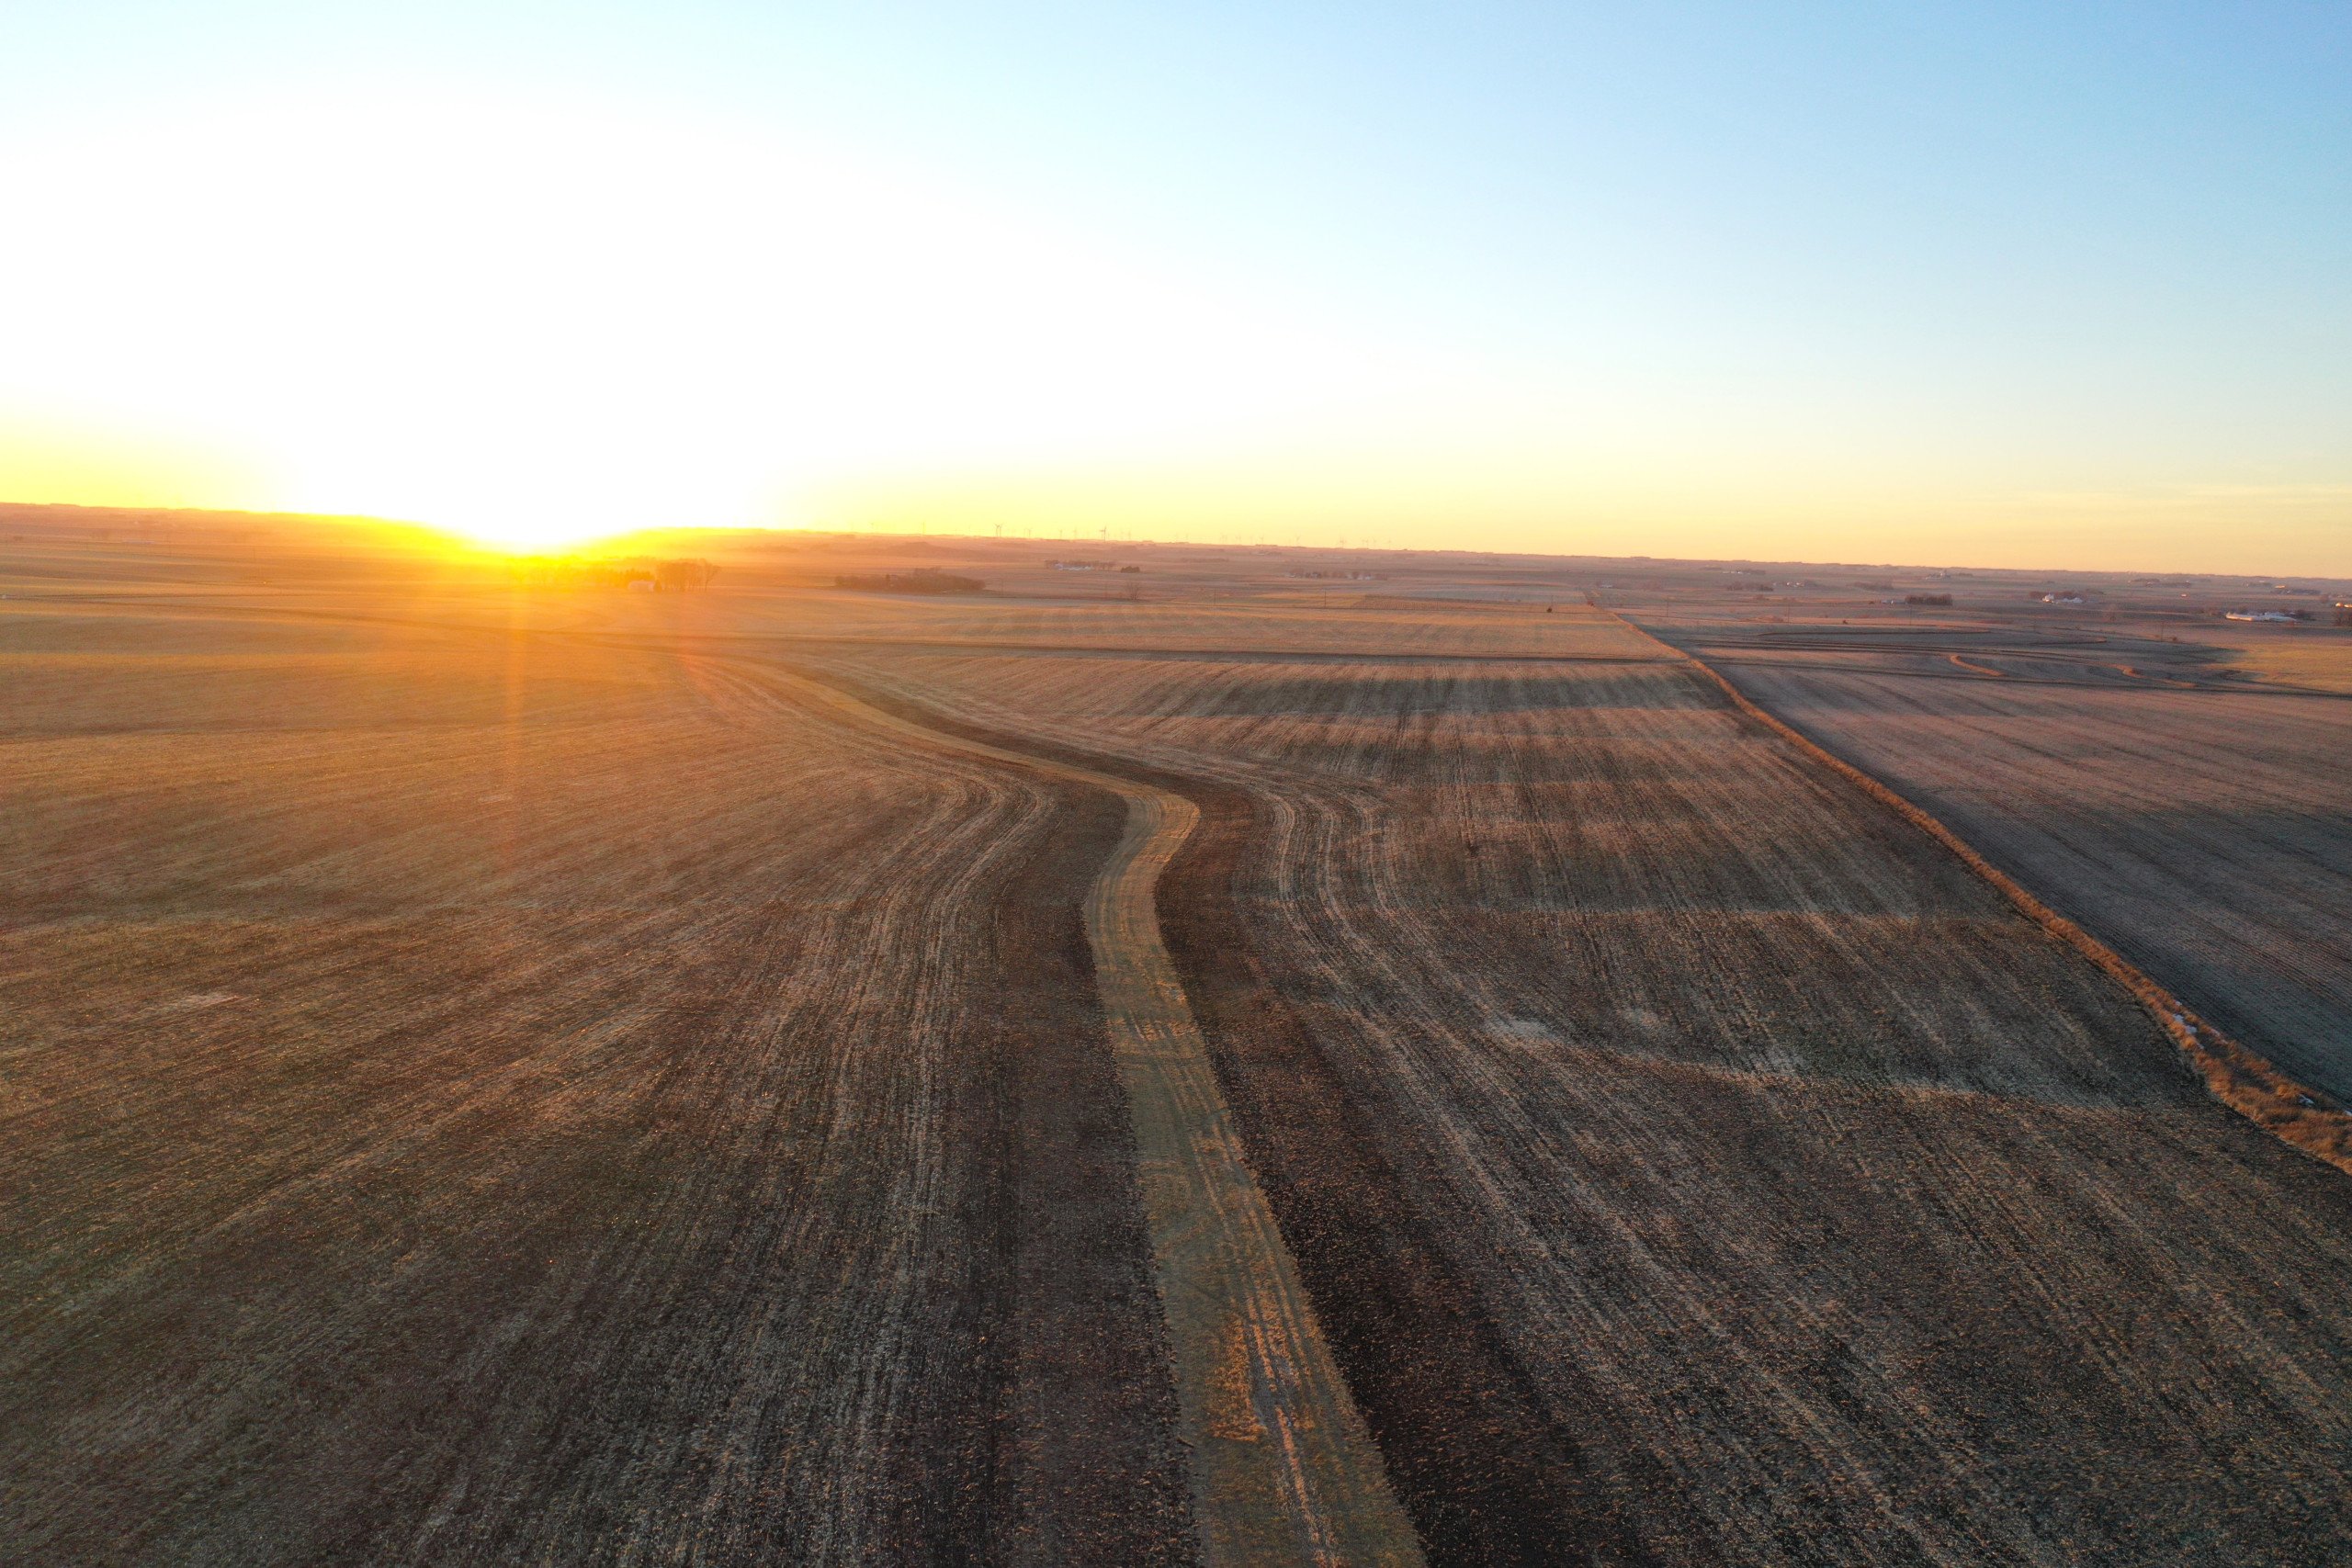 auctions-land-obrien-county-iowa-160-acres-listing-number-16553-DJI_0176-1-0.jpg